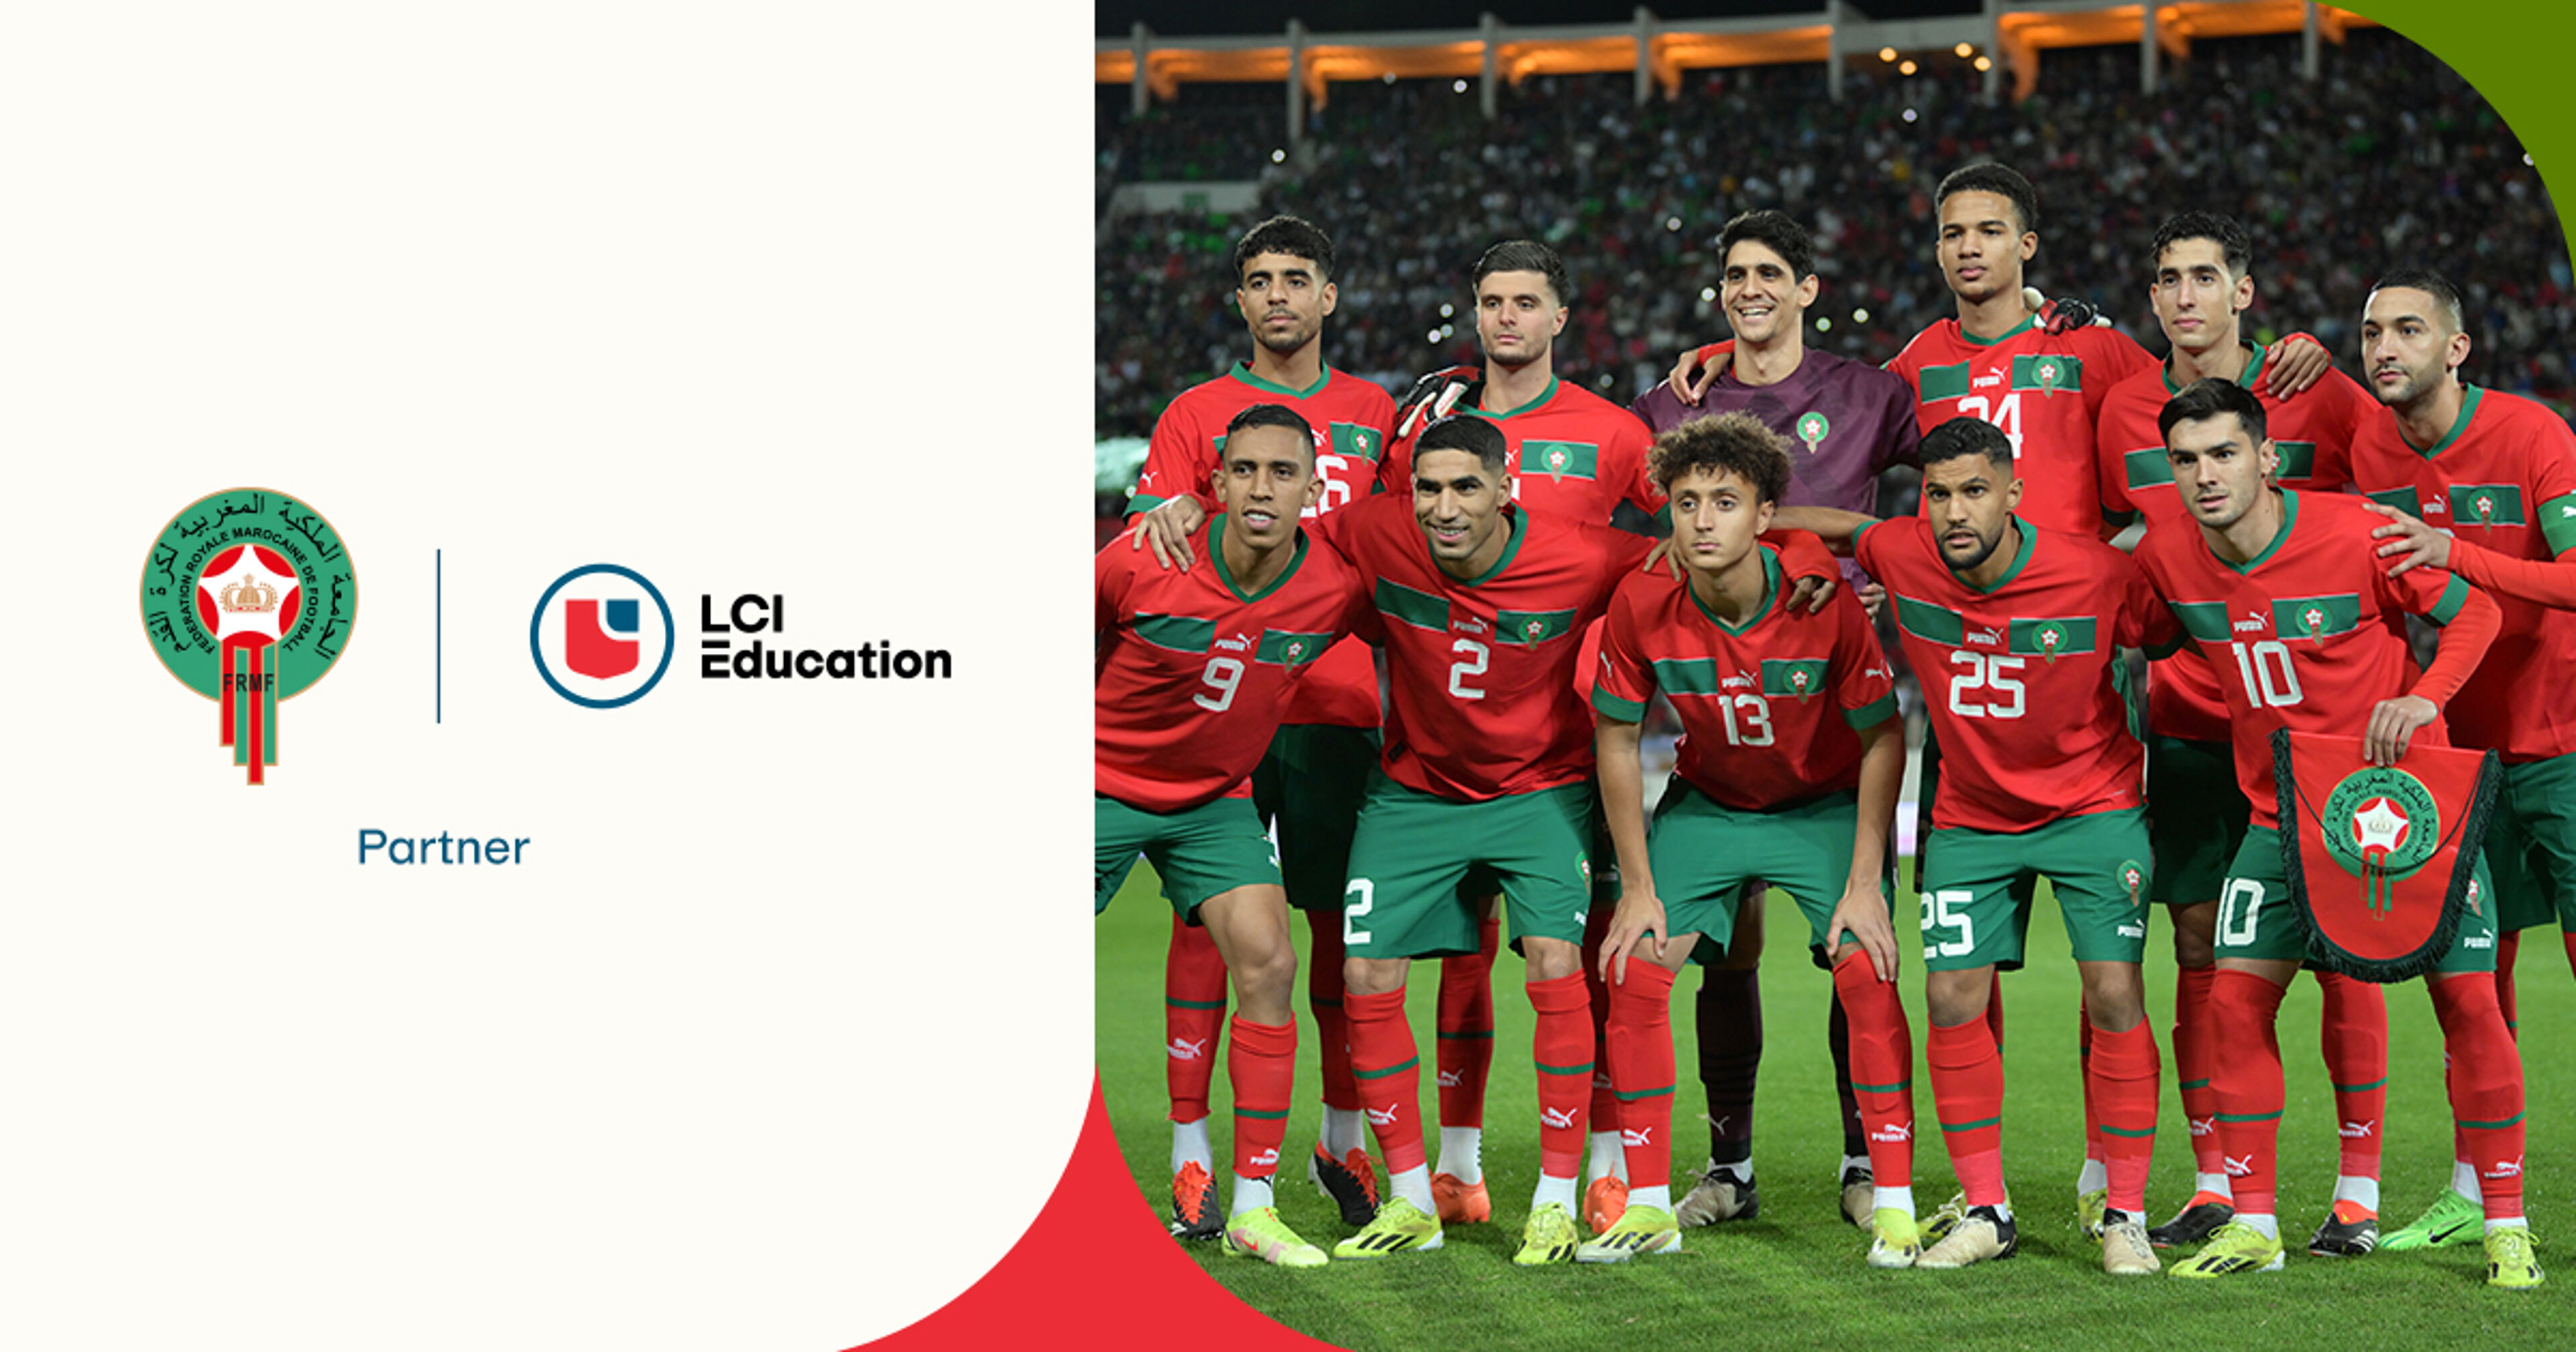 The Moroccan national football team poses in their green jerseys, partnered with LCI Education.